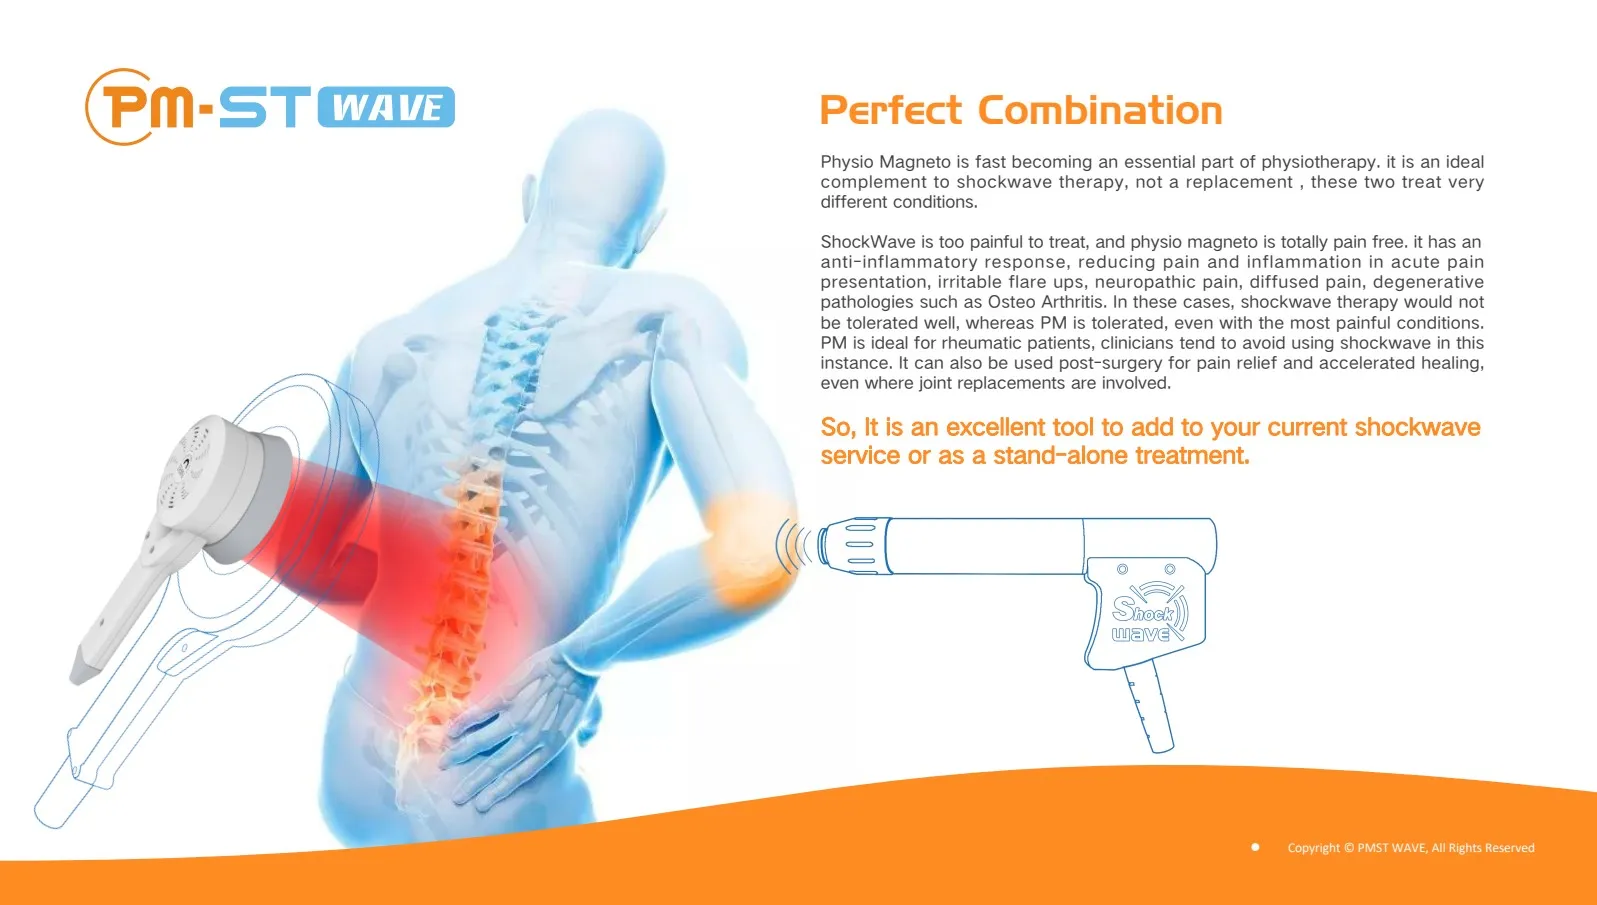 3 IN 1 Physio Magneto +NIRS SHOCKWAVE Pain Relief device